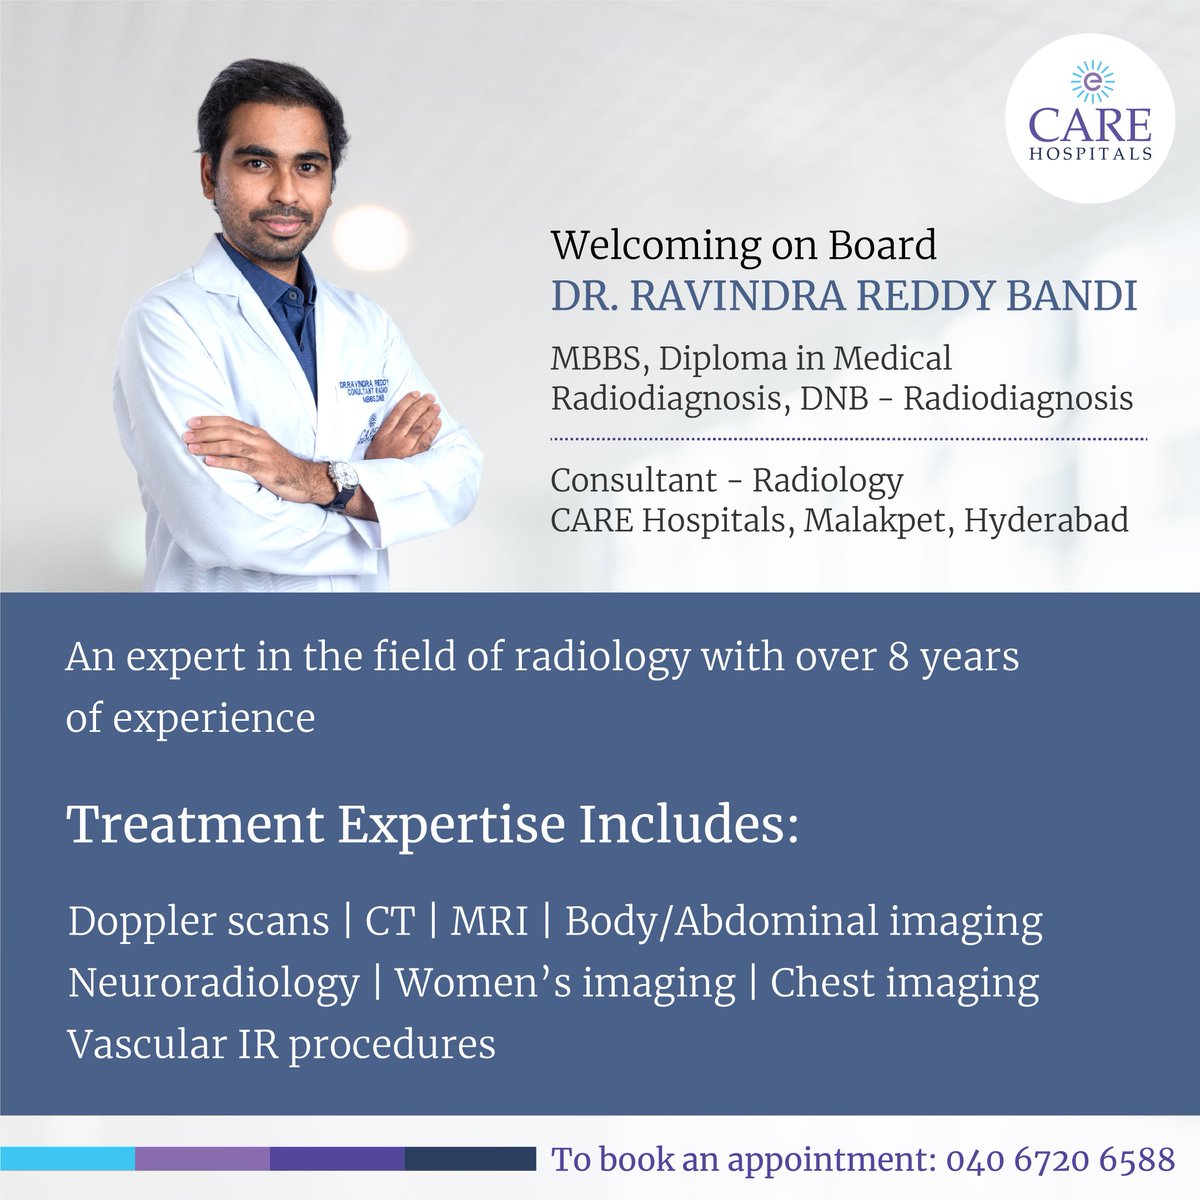 We are glad to announce that Dr. Ravindra Reddy Bandi has joined us as a Consultant - Radiology CARE Hospitals, Malakpet, Hyderabad.

To know more about the doctor, visit: carehospitals.com/doctor/hyderab…

#CAREHospitals #TransaformingHealthcare #Radiology #Neuroradiology #ChestImaging